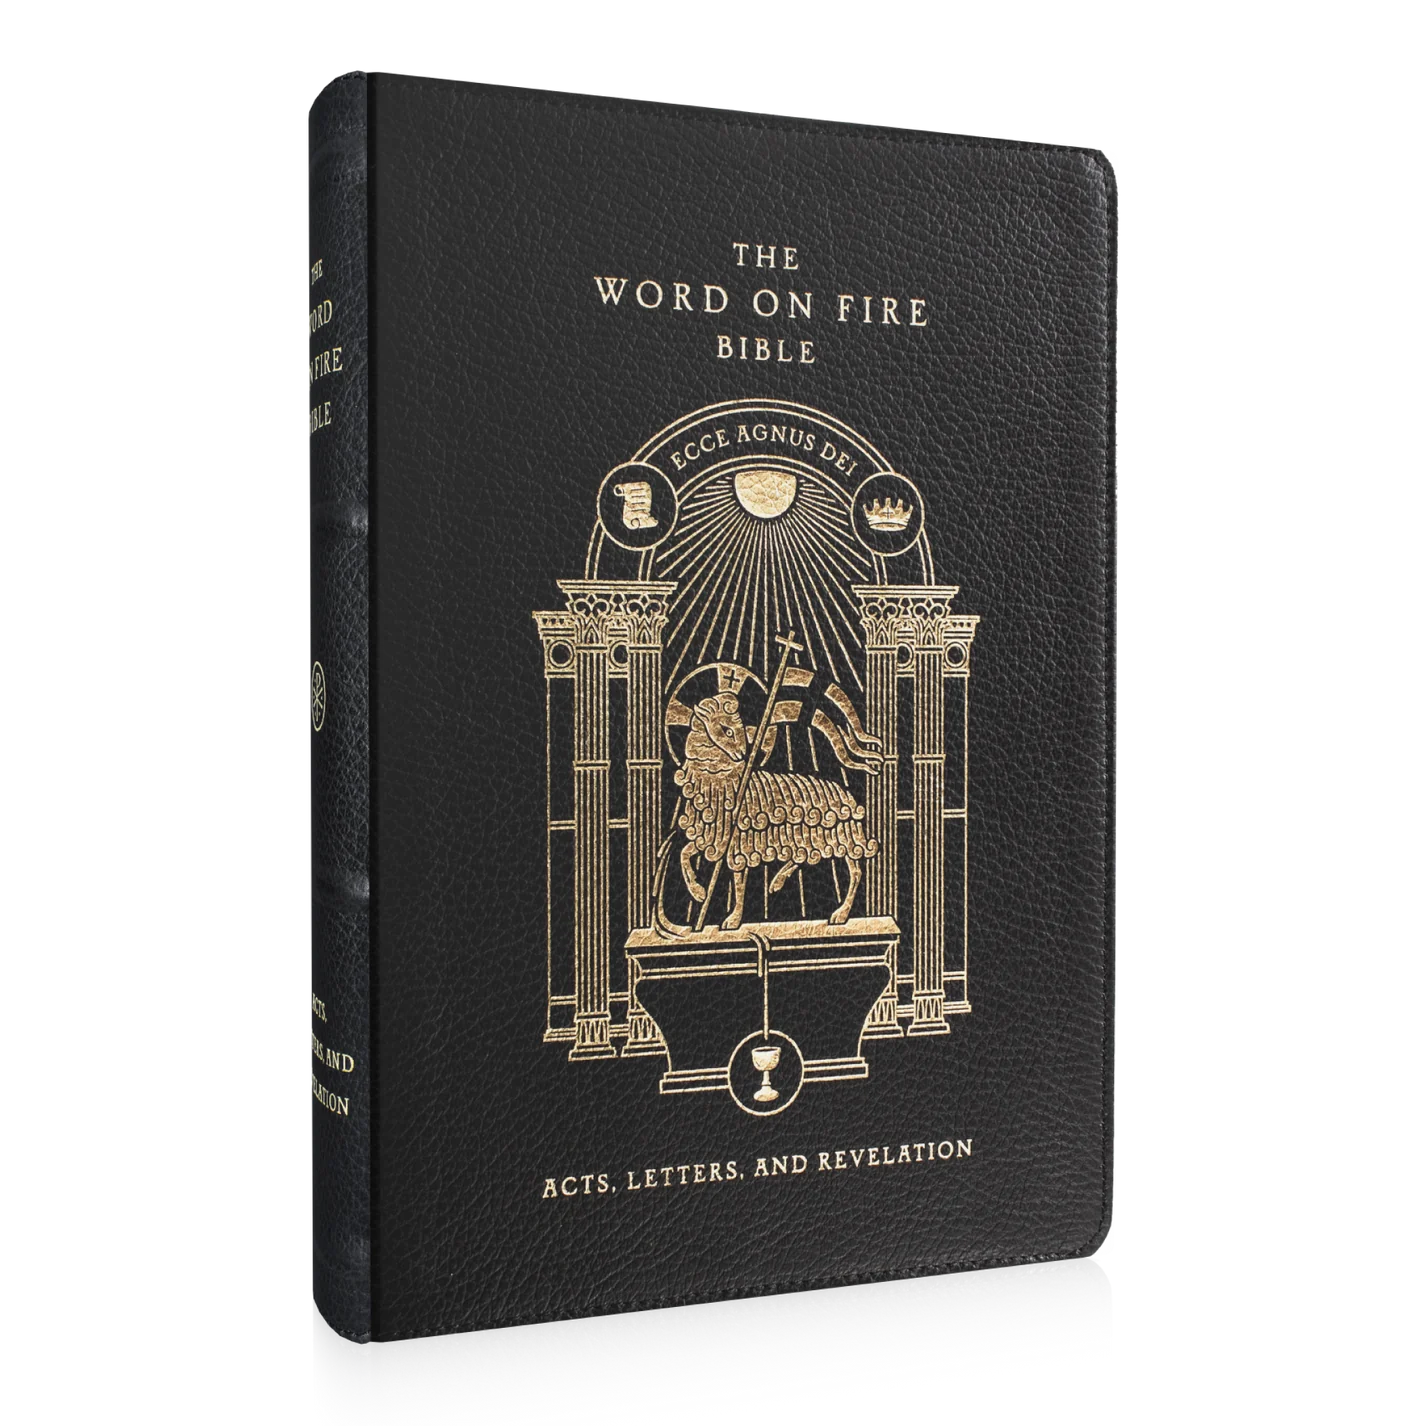 The Word on Fire Bible (Volume II): Acts, Letters and Revelation - Leather